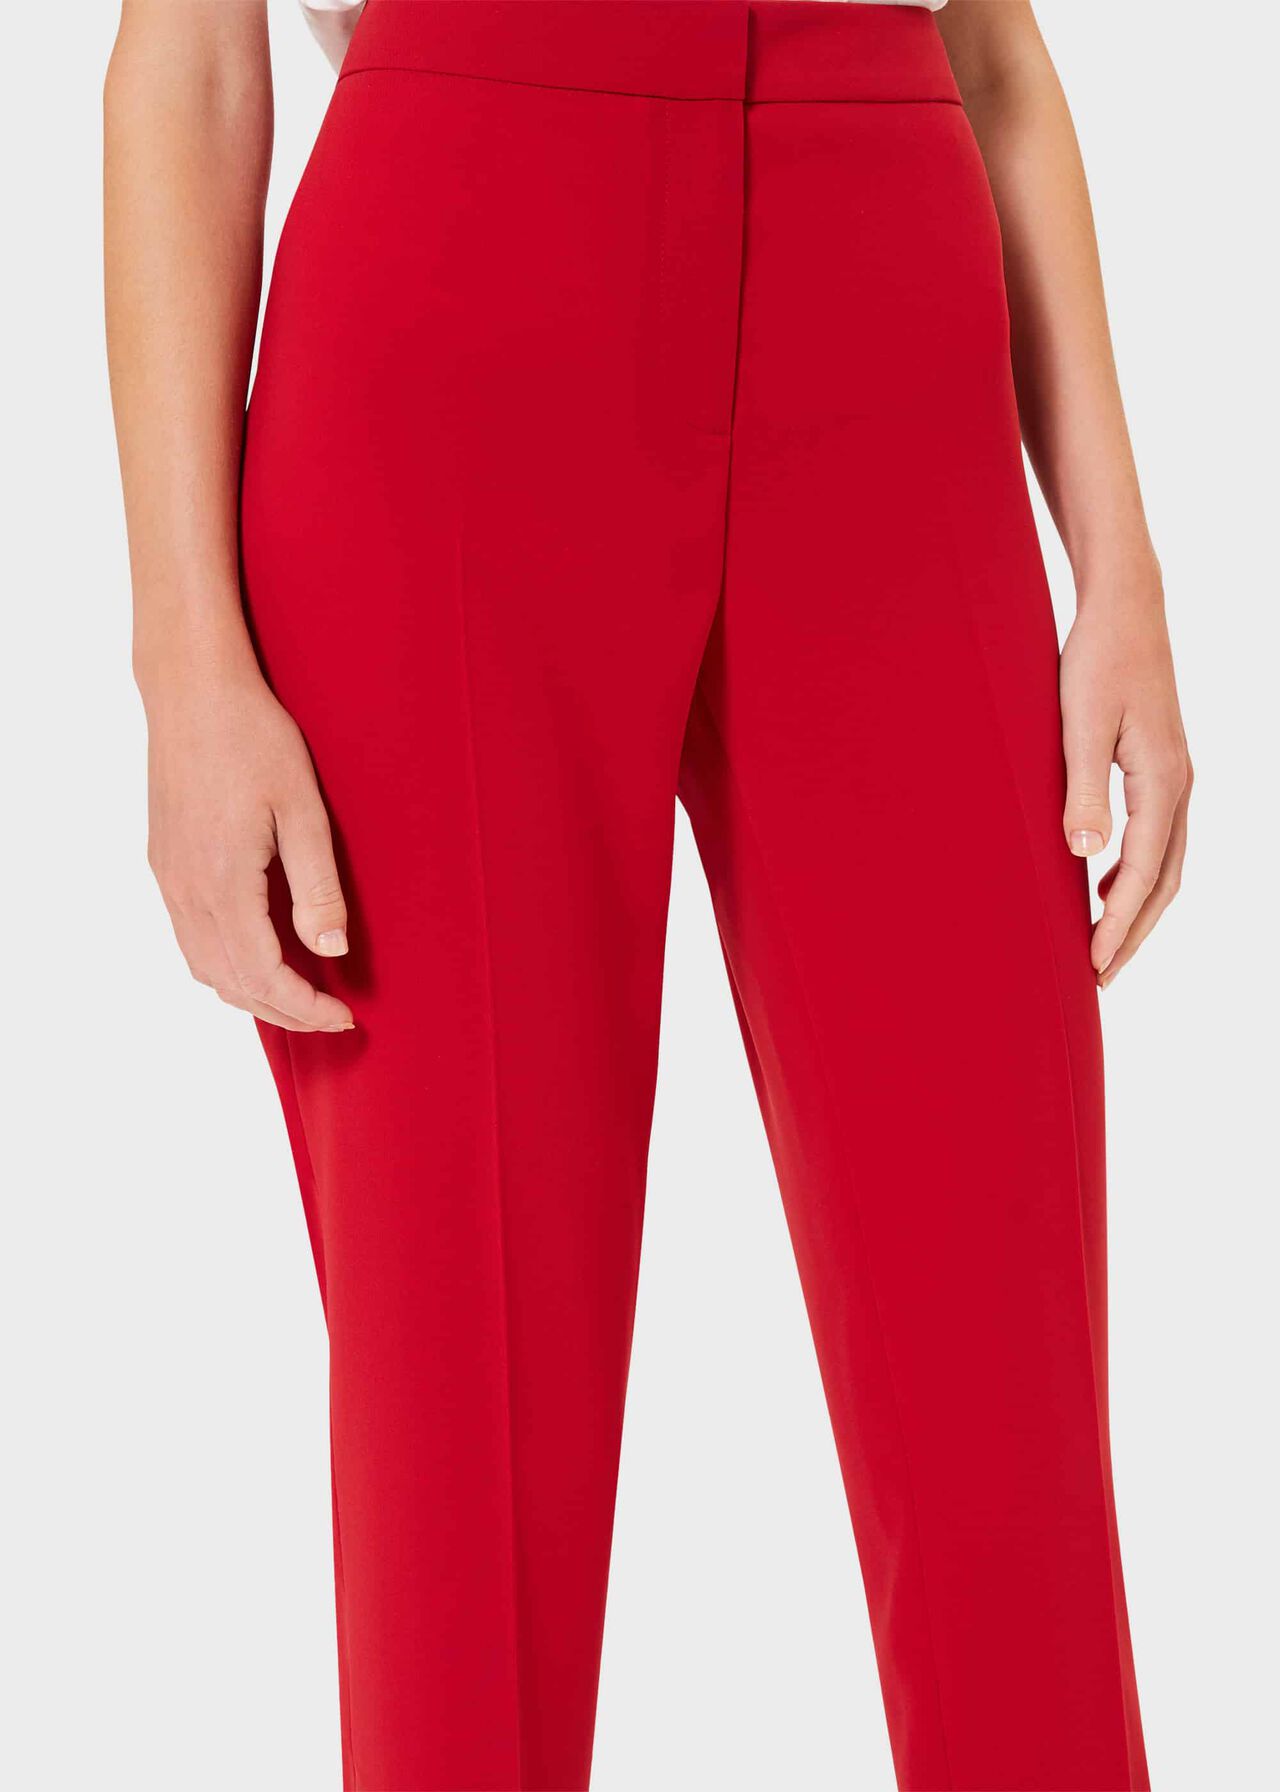 Zinnia Tapered Pants, Red, hi-res